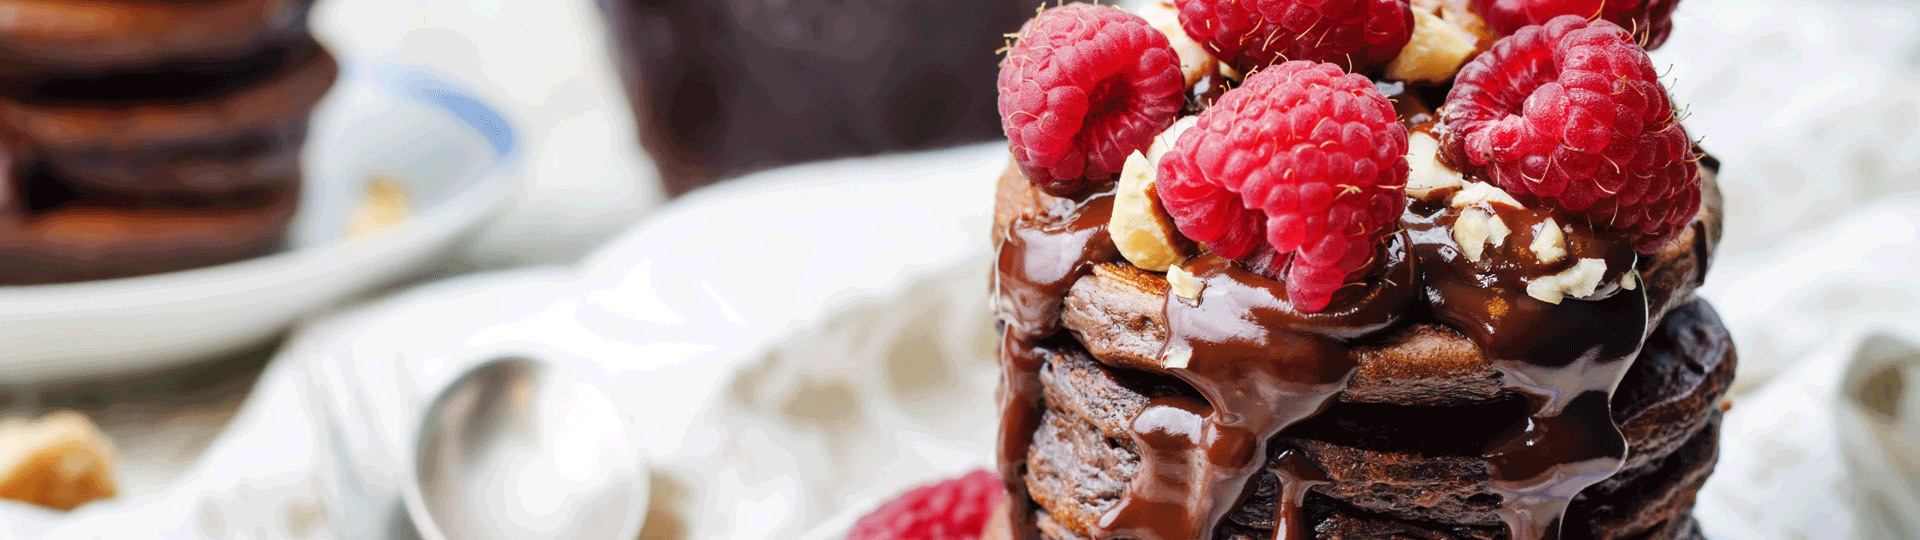 stack of chocolate cakes and raspberries